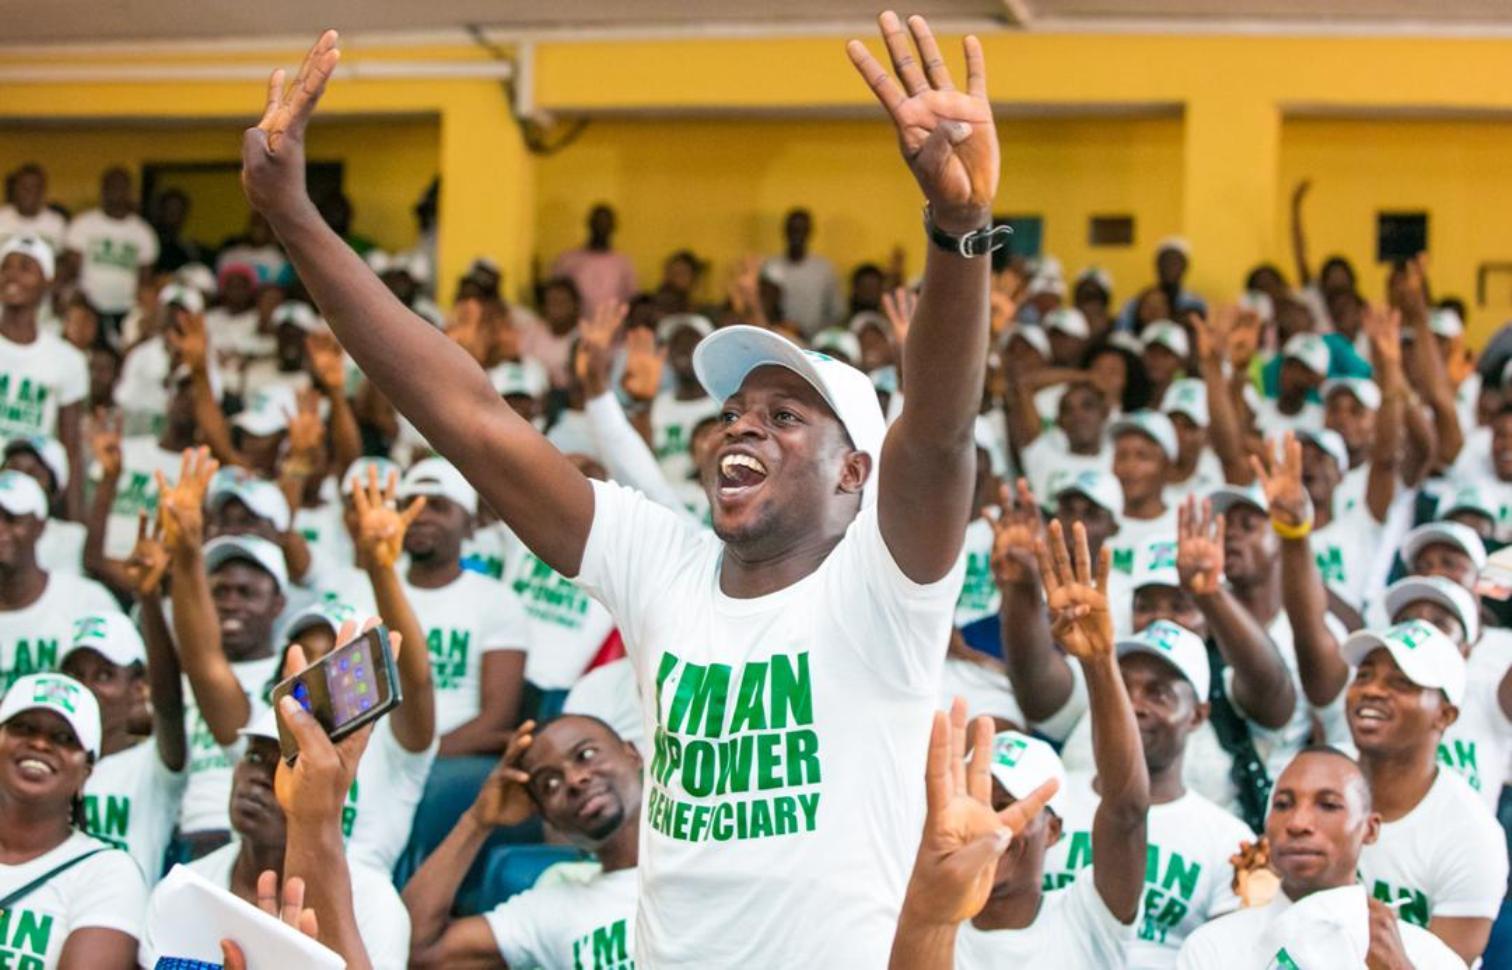 N-Power: Over 3m applications received so far ― FG